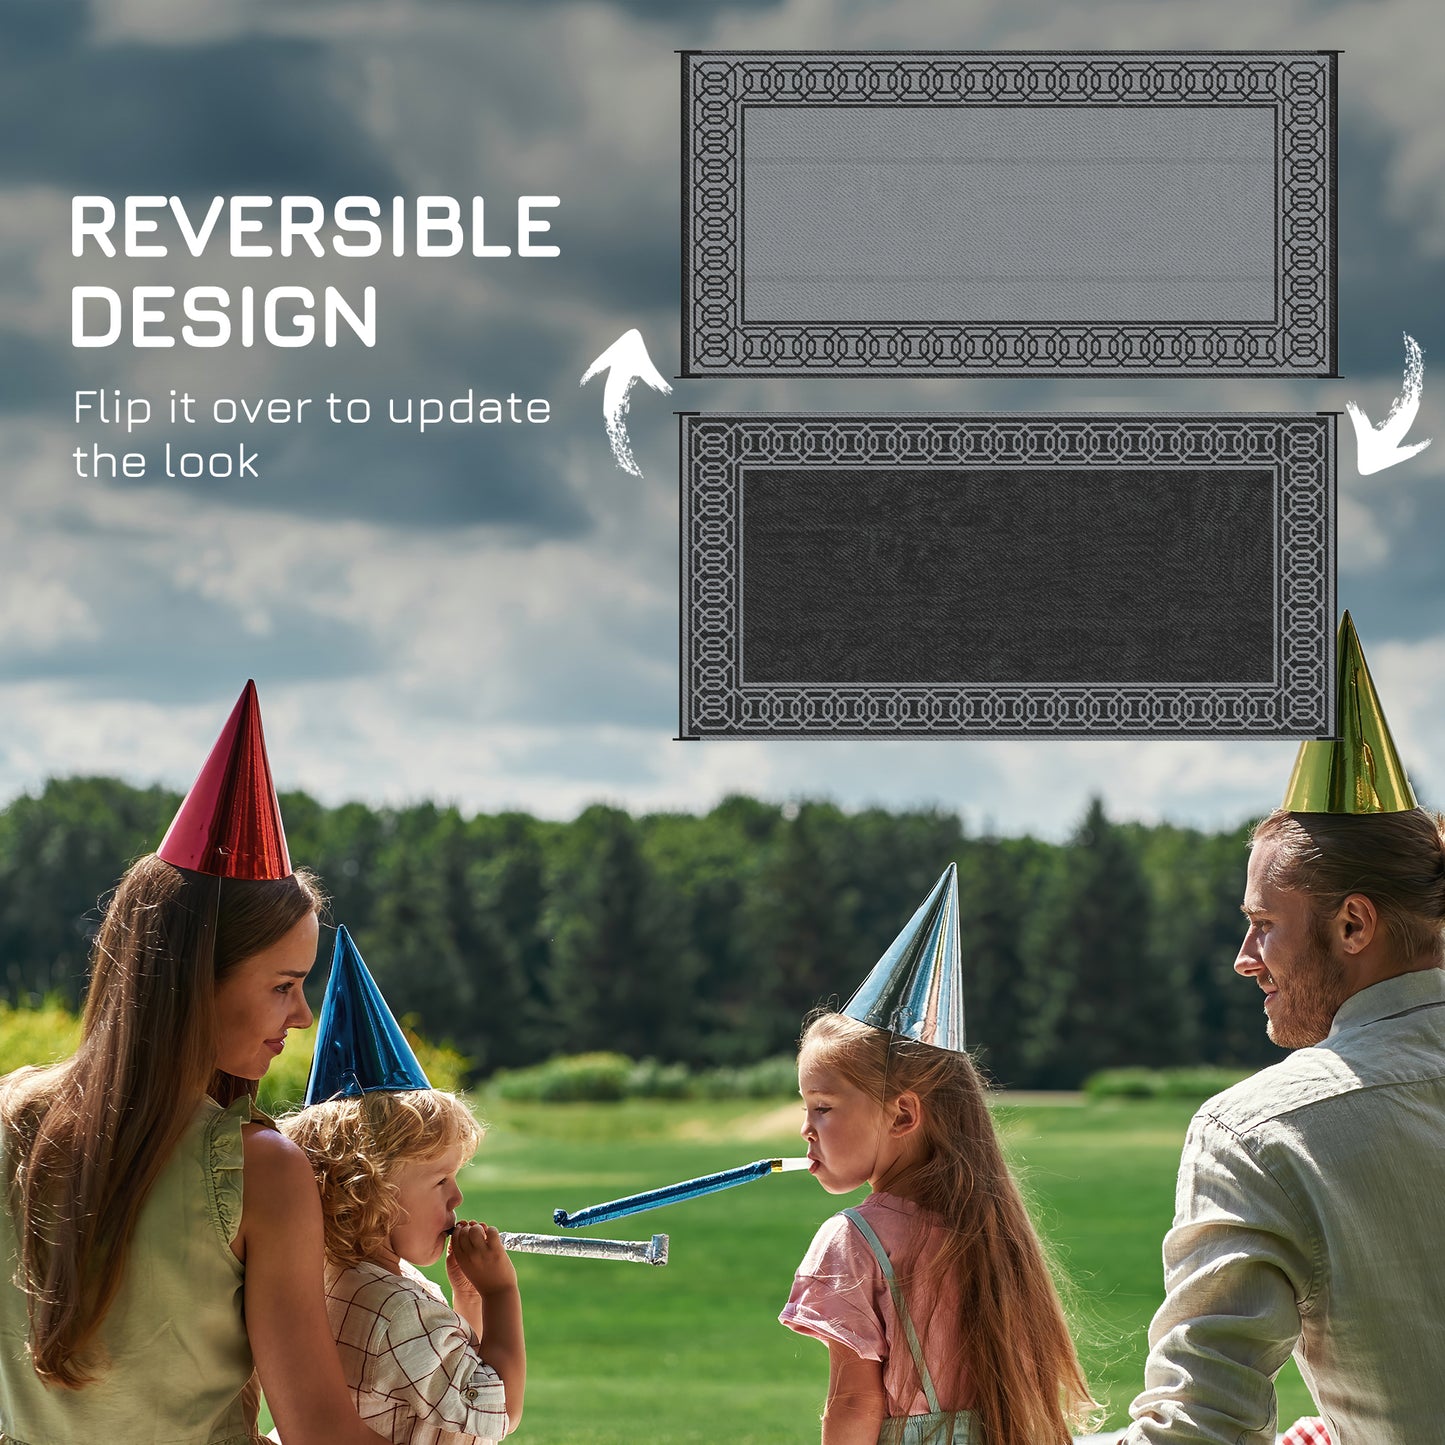 Portable Outdoor Rug with Carrying Bag, 9' x 18' Reversible Mat, Waterproof Plastic Straw RV Rug for Backyard, Deck, Picnic, Beach, Camping, Black and Grey at Gallery Canada